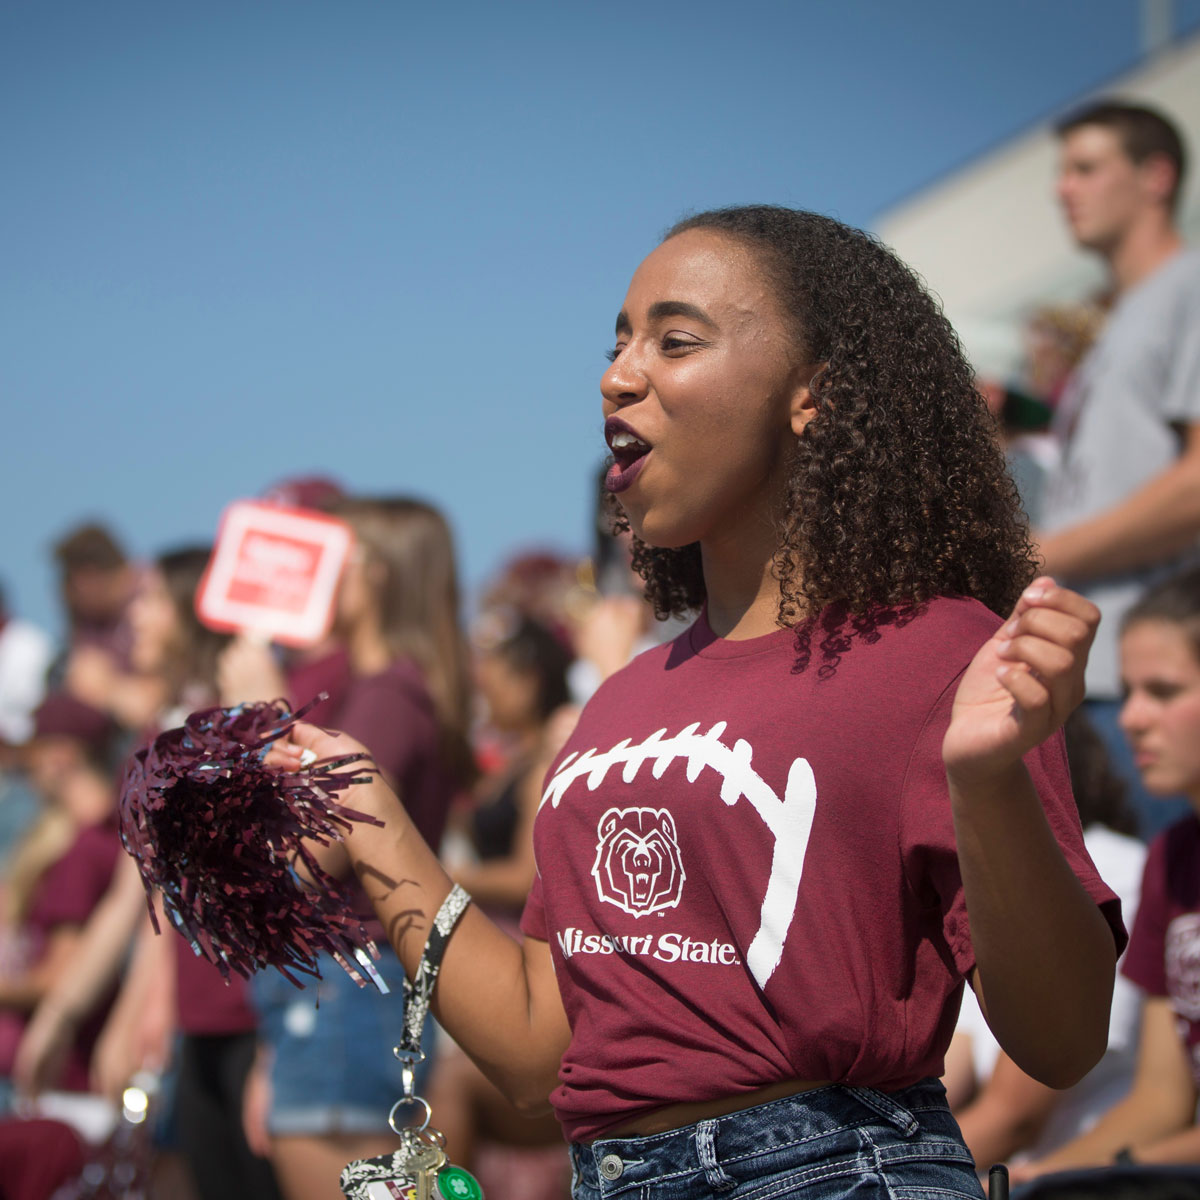 Female student cheers in student section of football stadium